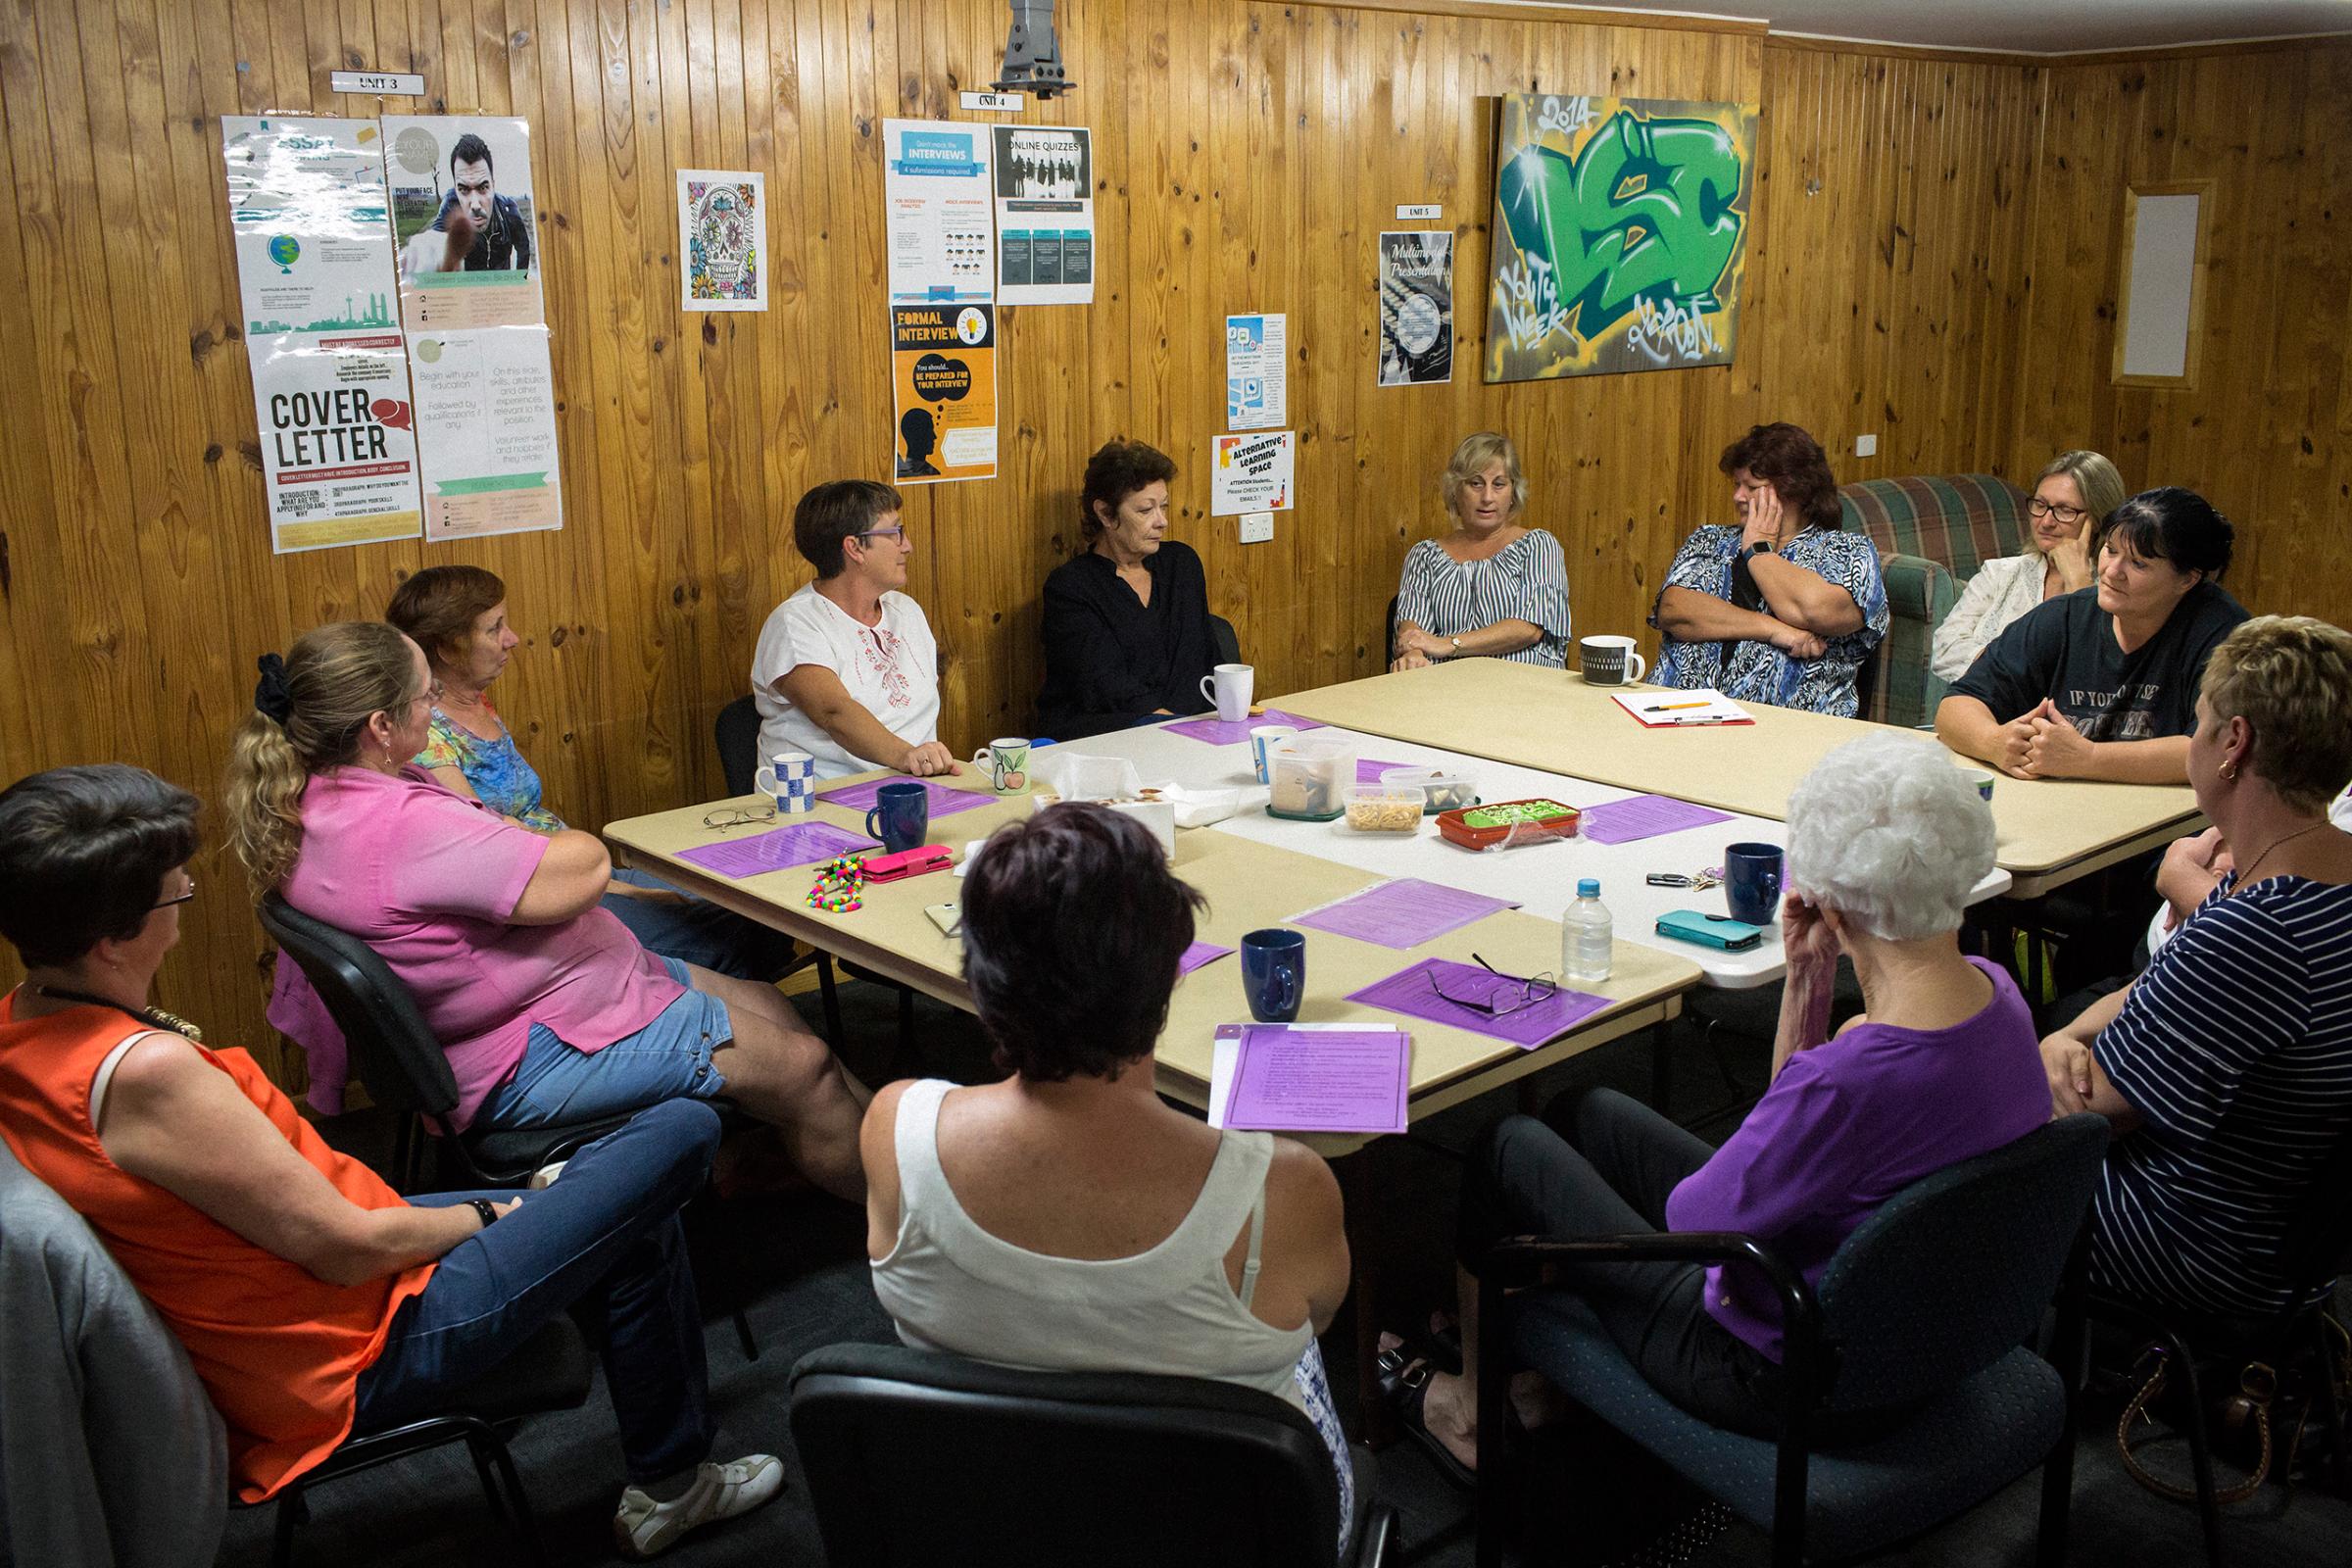 Members of a support group that brings together loved ones of ice addicts at a community center in Yeppoon, north of Rockhampton, in April 2017.